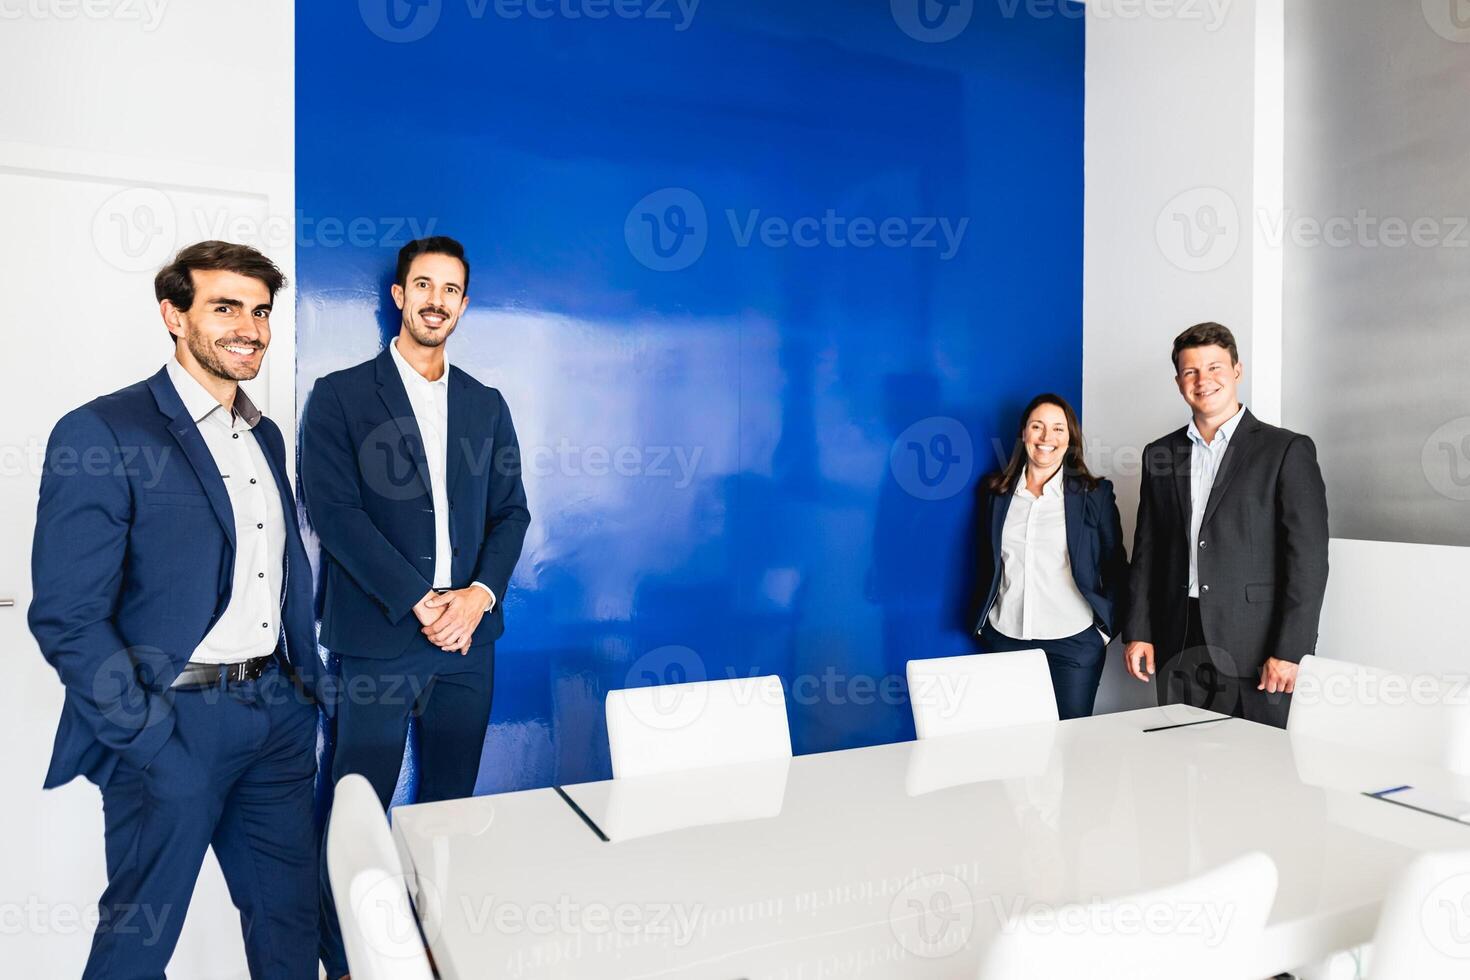 Business team standing in front of camera during meeting work - Entrepreneurship concept photo